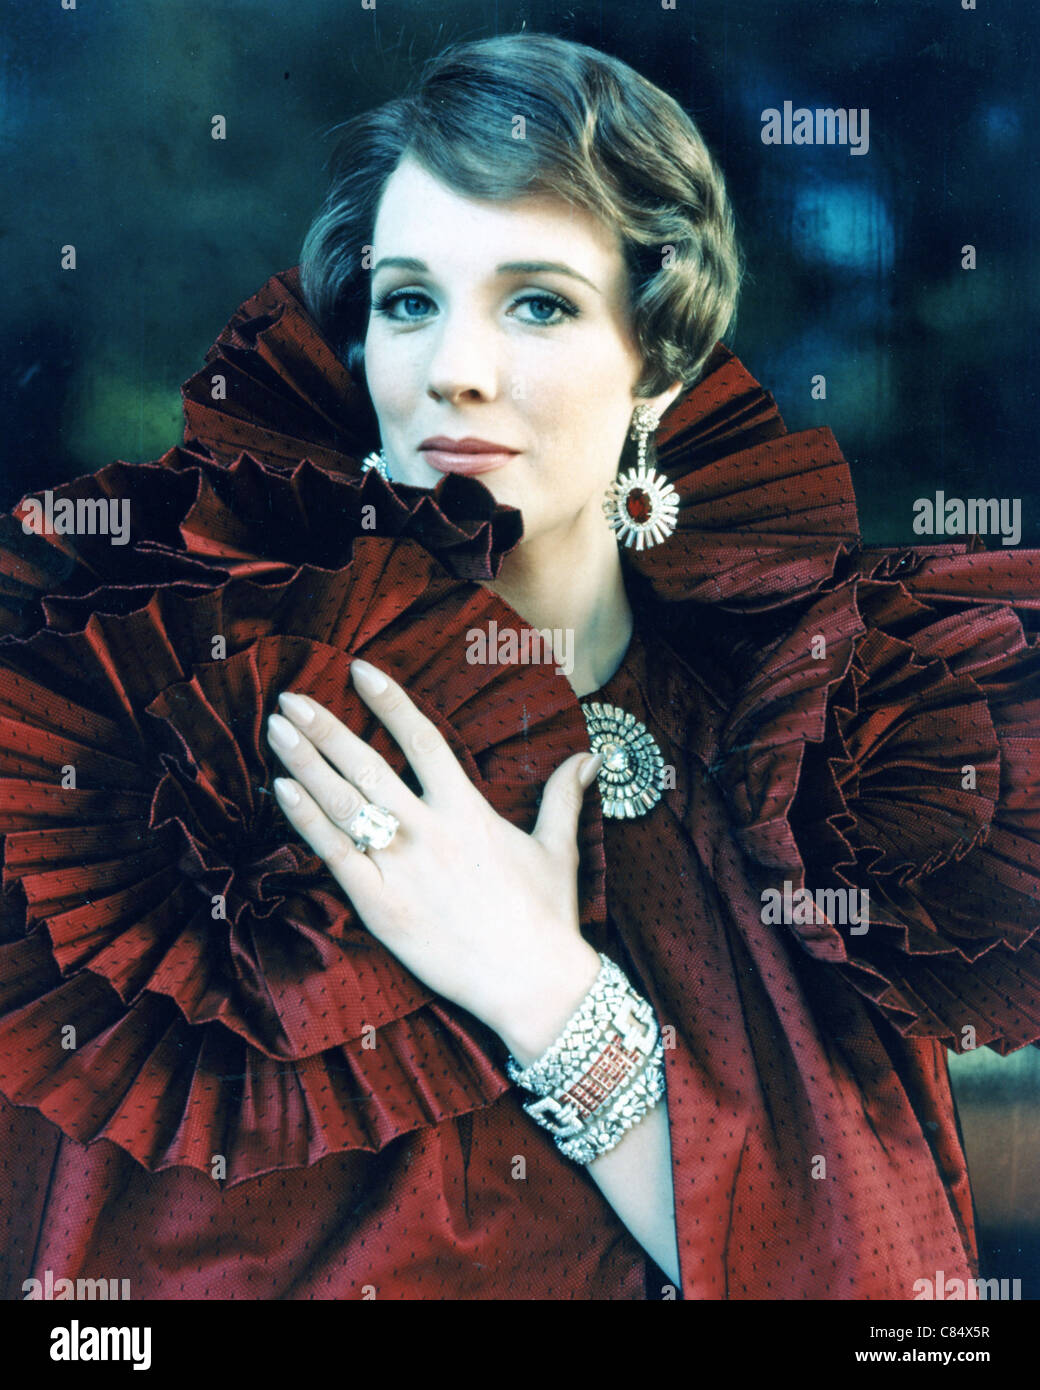 STAR ! Julie Andrews come Gertrude Lawrence nel 1968 Robert Wise/film TCF Foto Stock